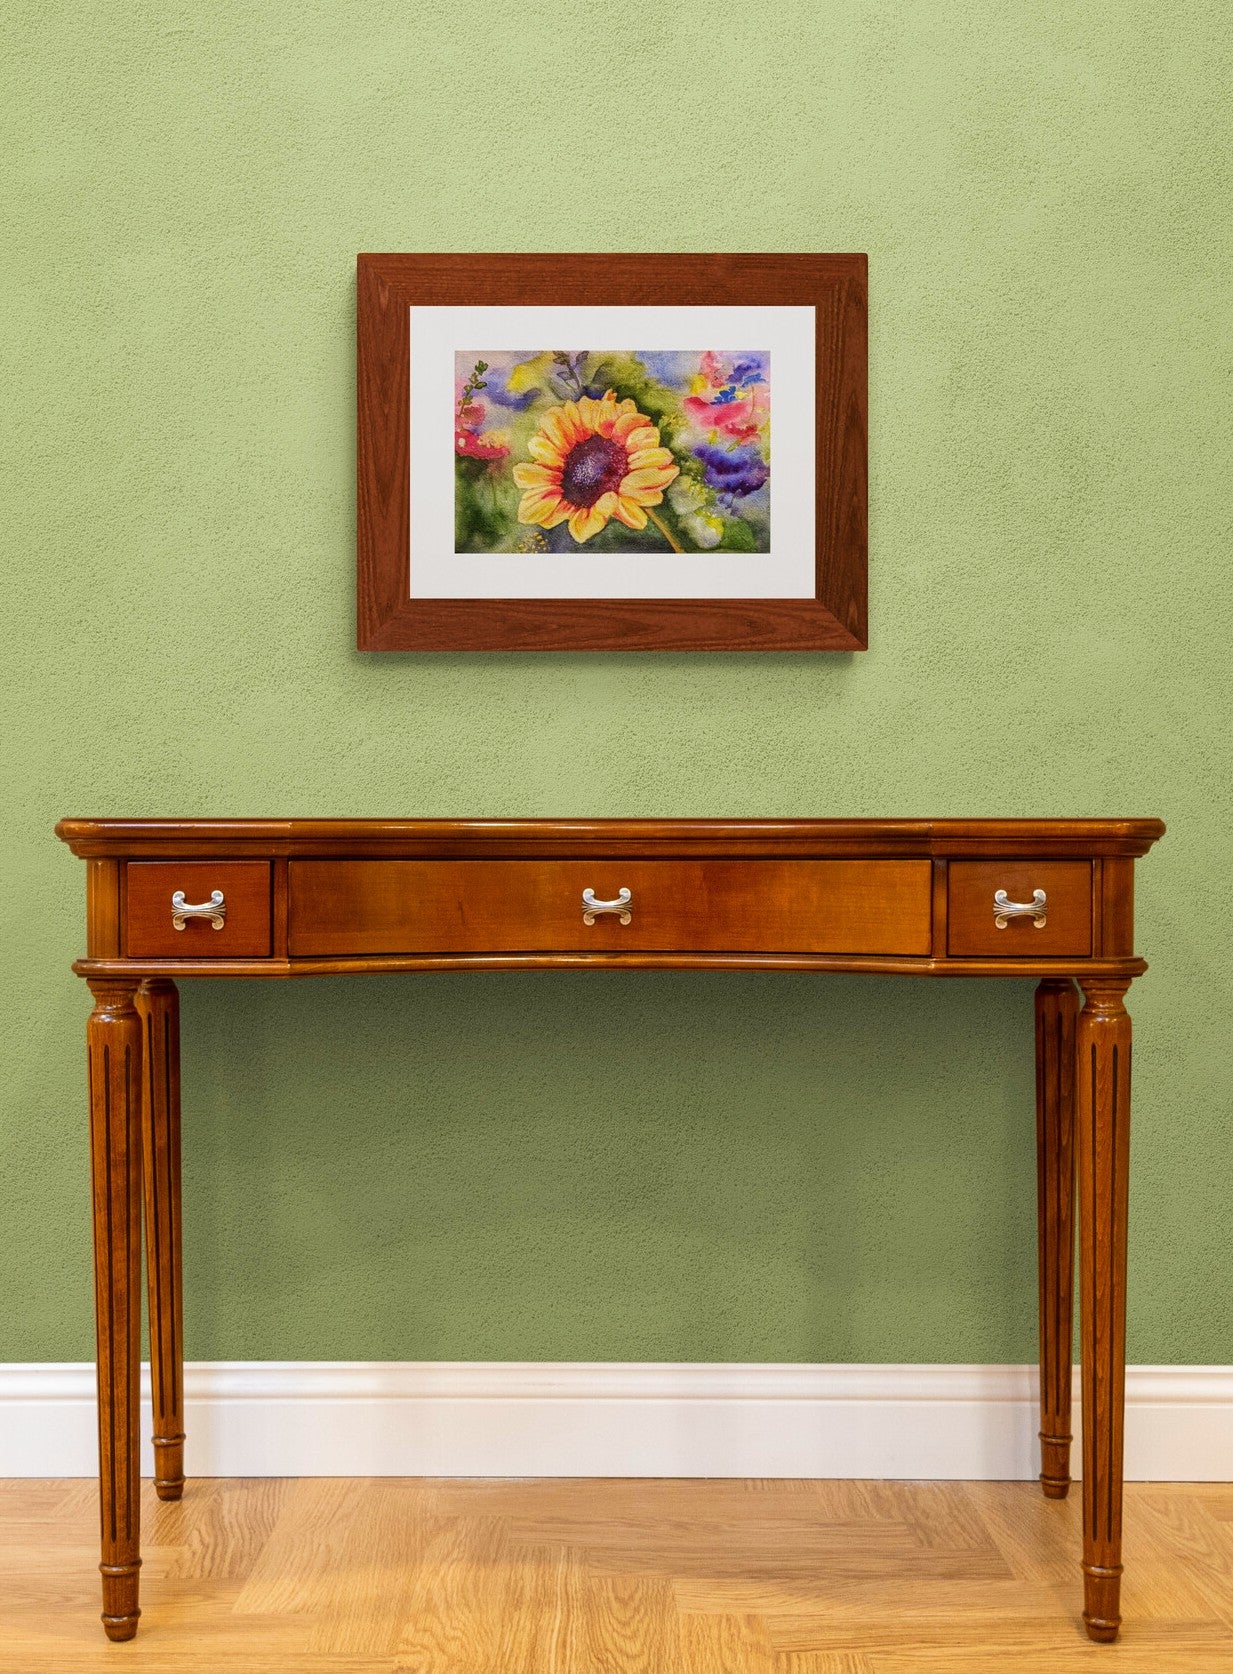 Sunflower for Peace colorful watercolor painting on green wall above credenza.